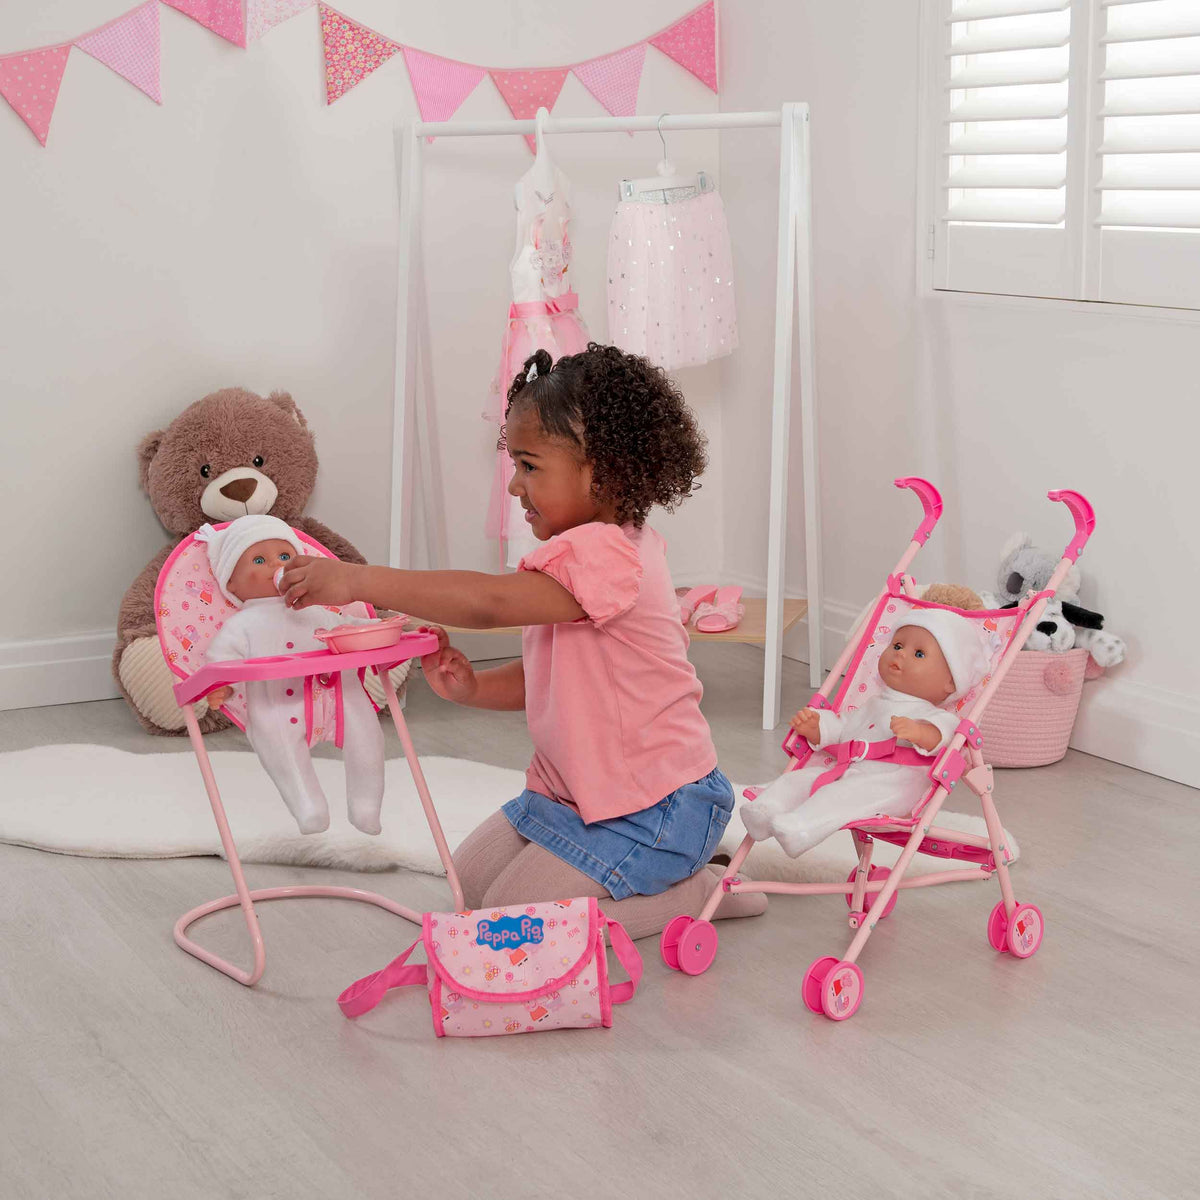 Peppa Pig Nursery Bundle - 7 Piece Playset: A colourful Peppa Pig-themed toy set including a high chair, stroller, Feeding set, perfect for toddlers&#39; imaginative play and doll care.